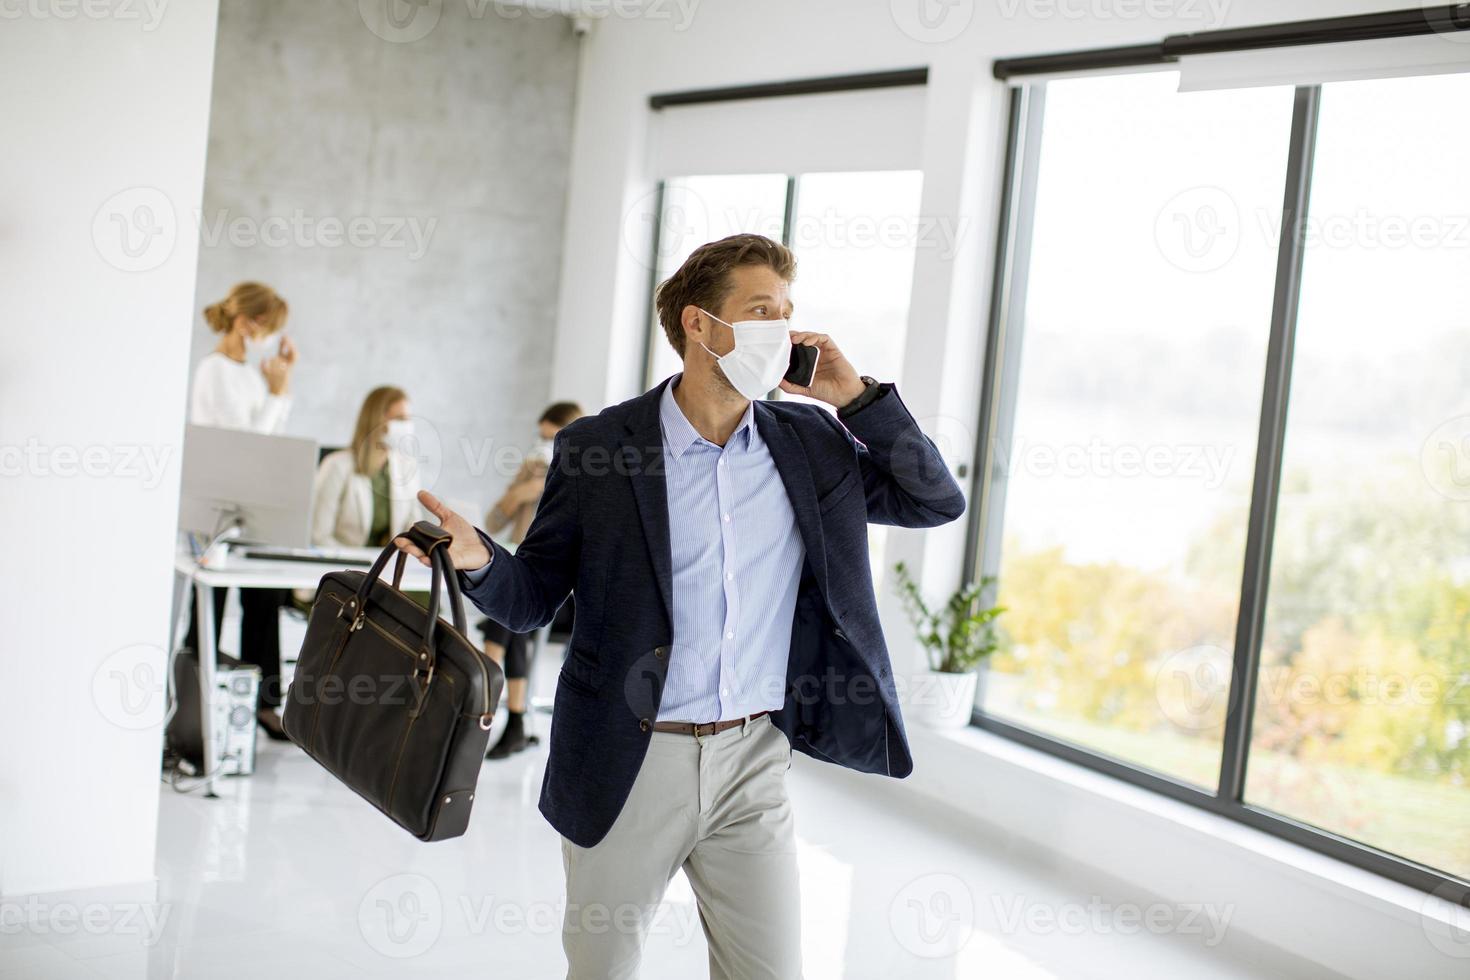 Masked businessman taking on phone with briefcase photo